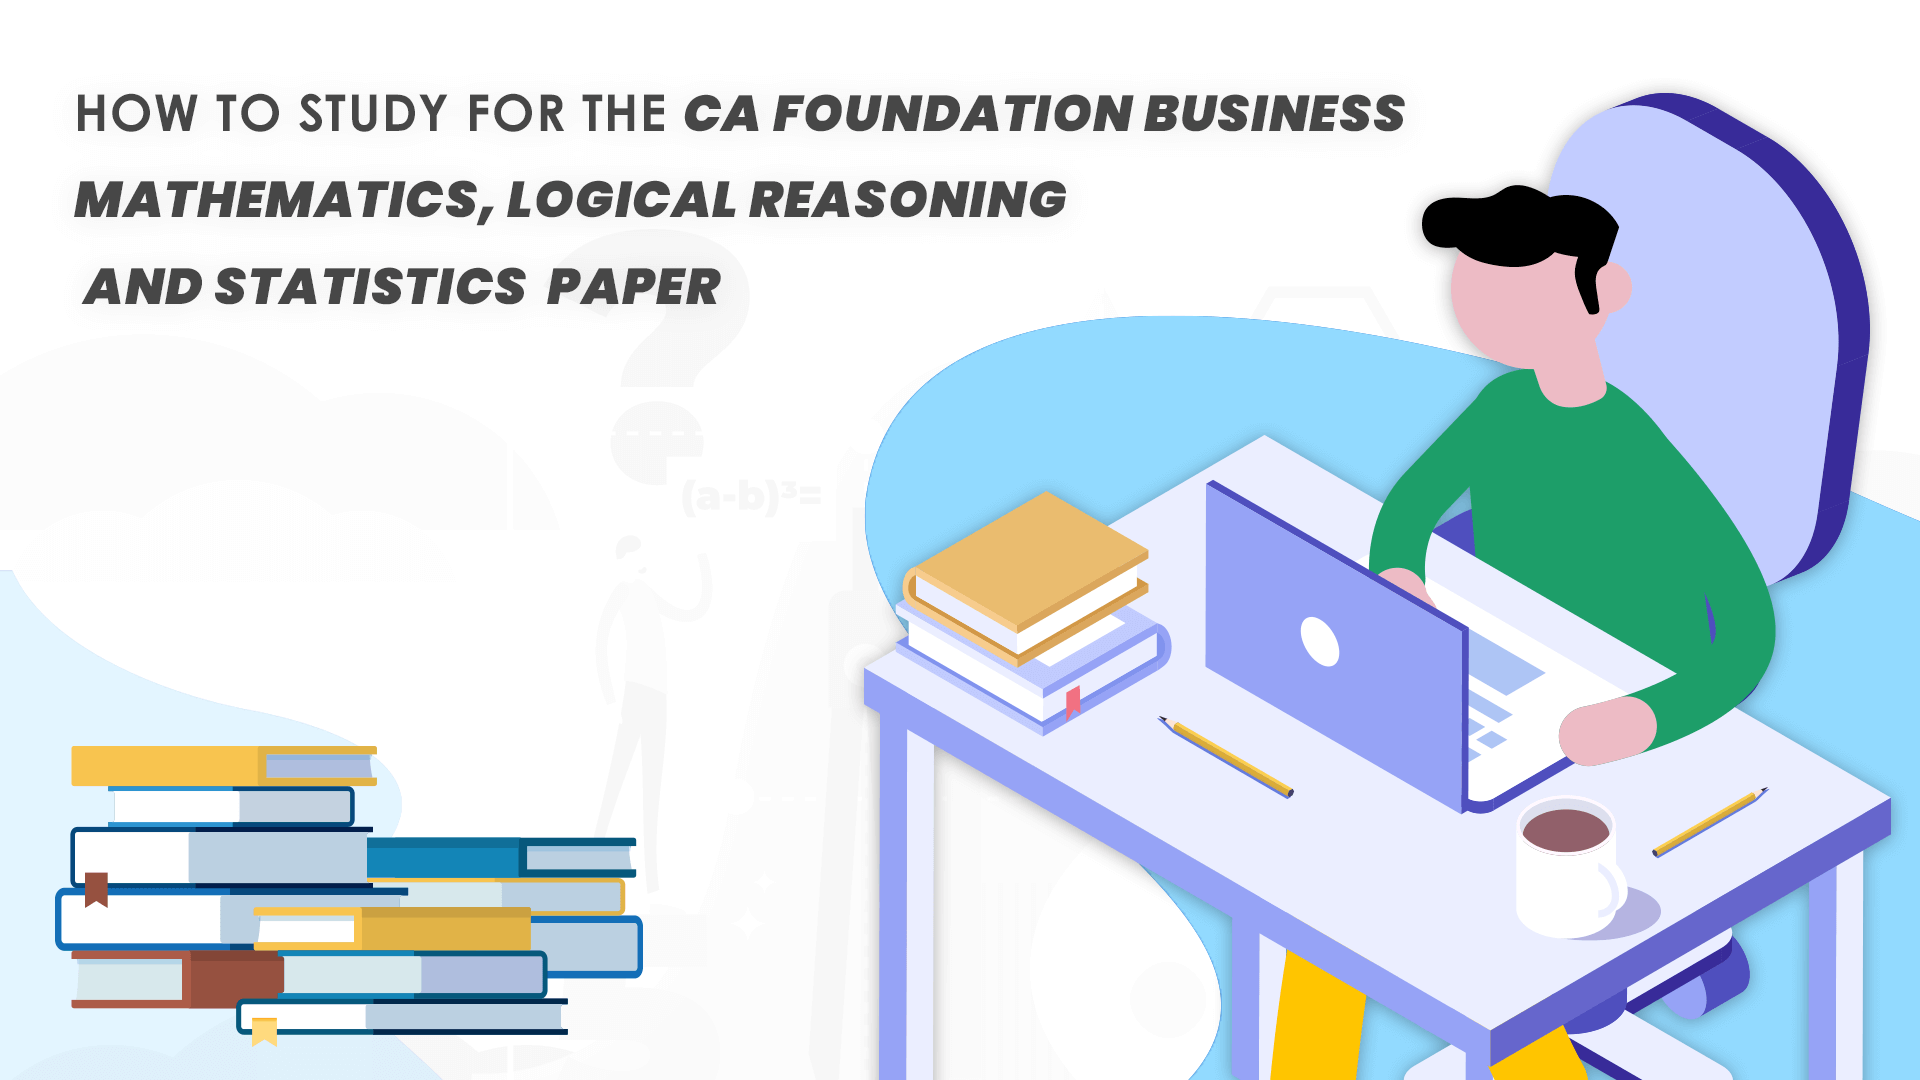 Can I pursue multiple course like CA, CS and CMA simultaneously? If so, how do I plan my preparation?